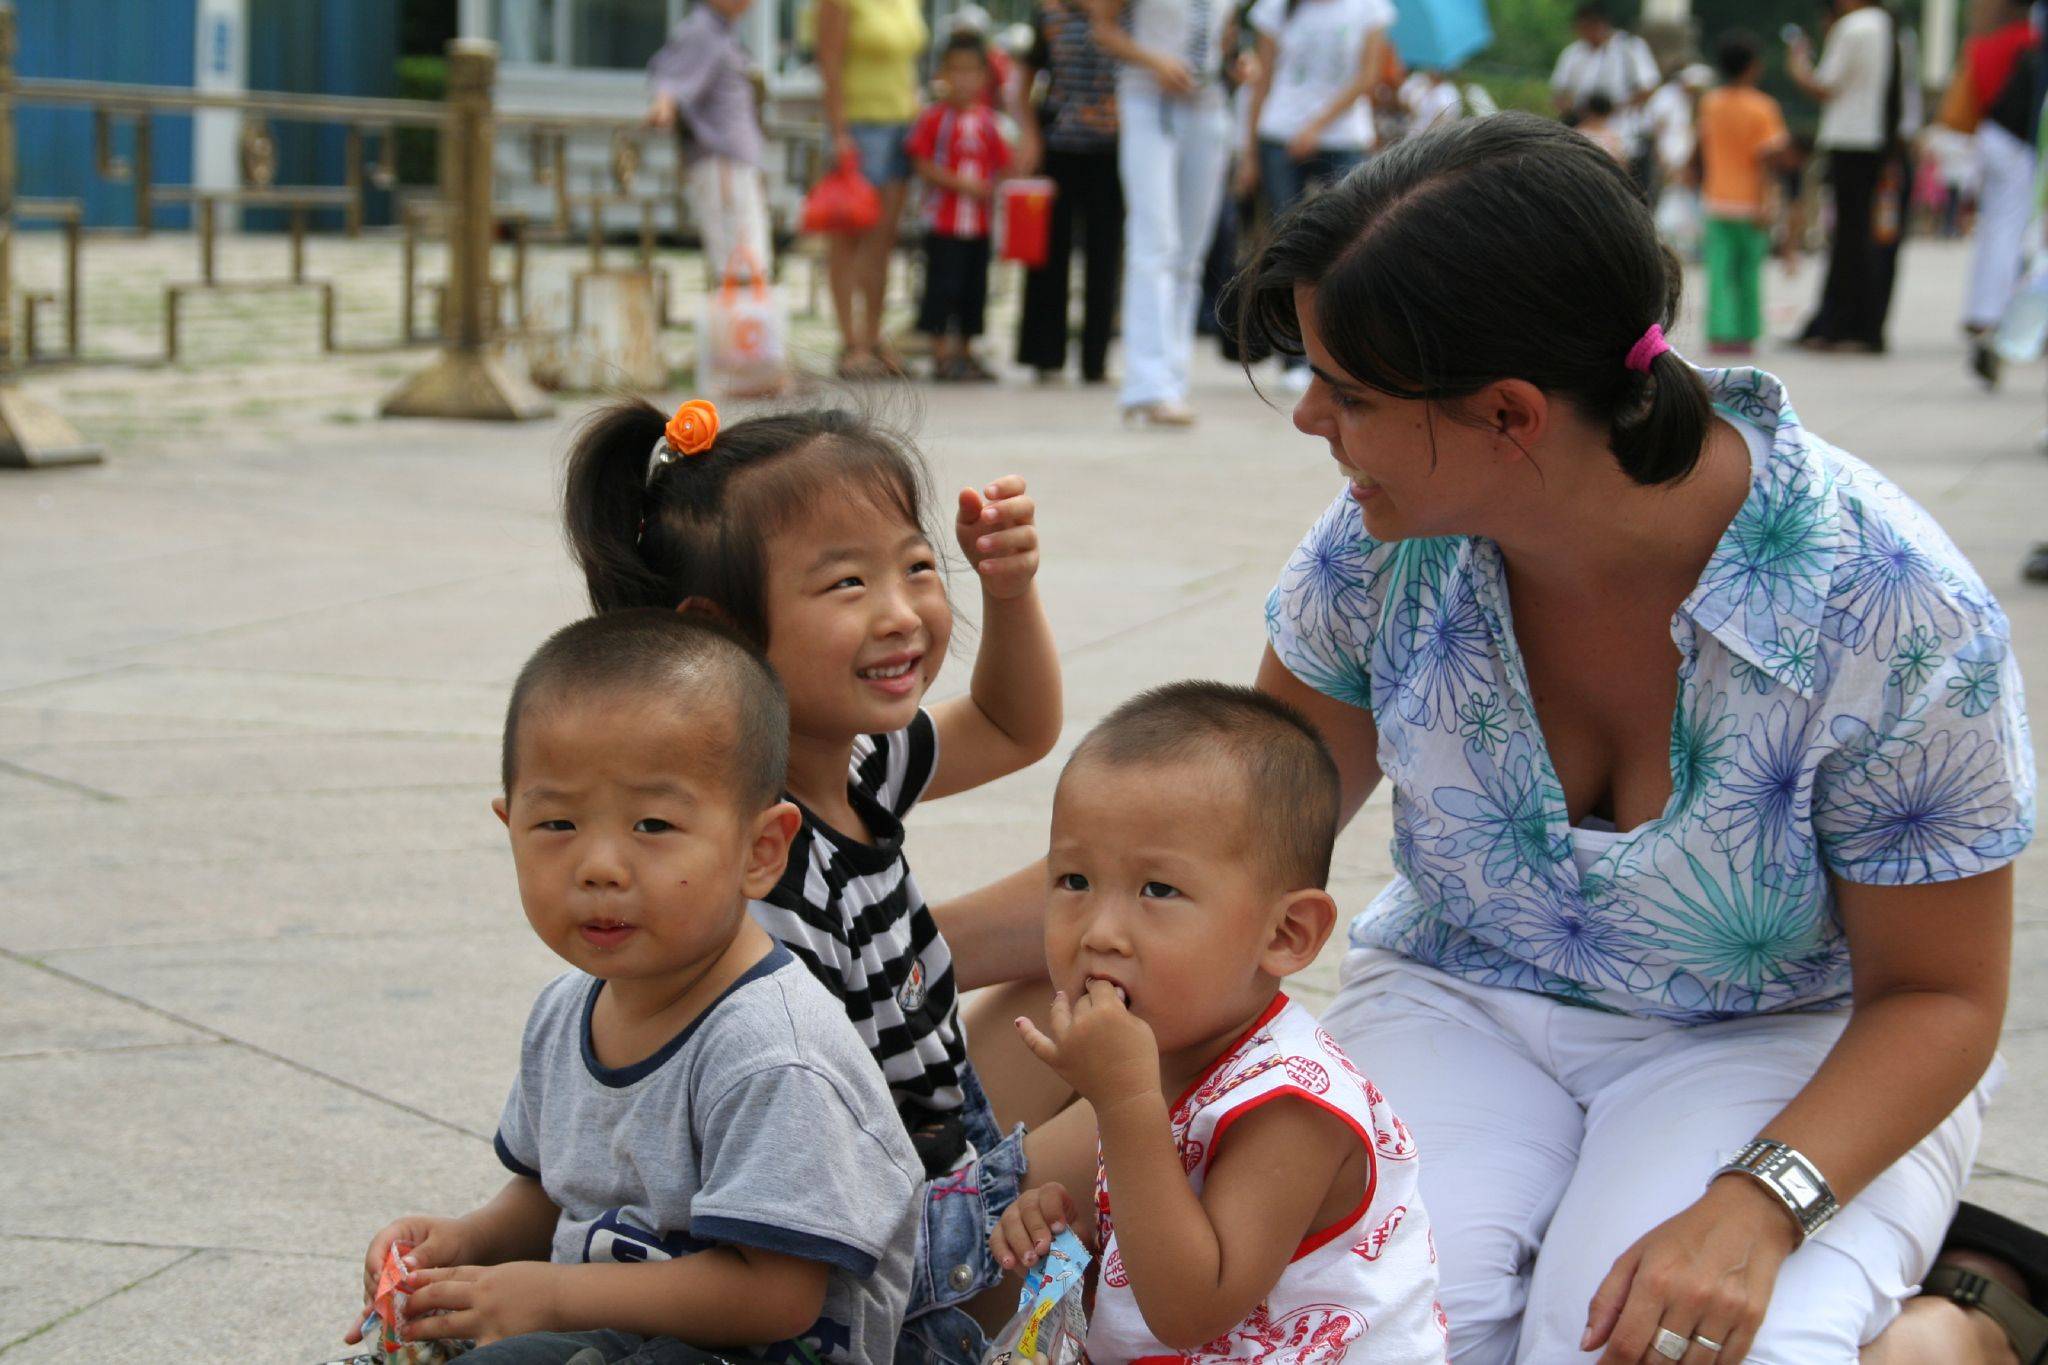 Chinese families need to have more children